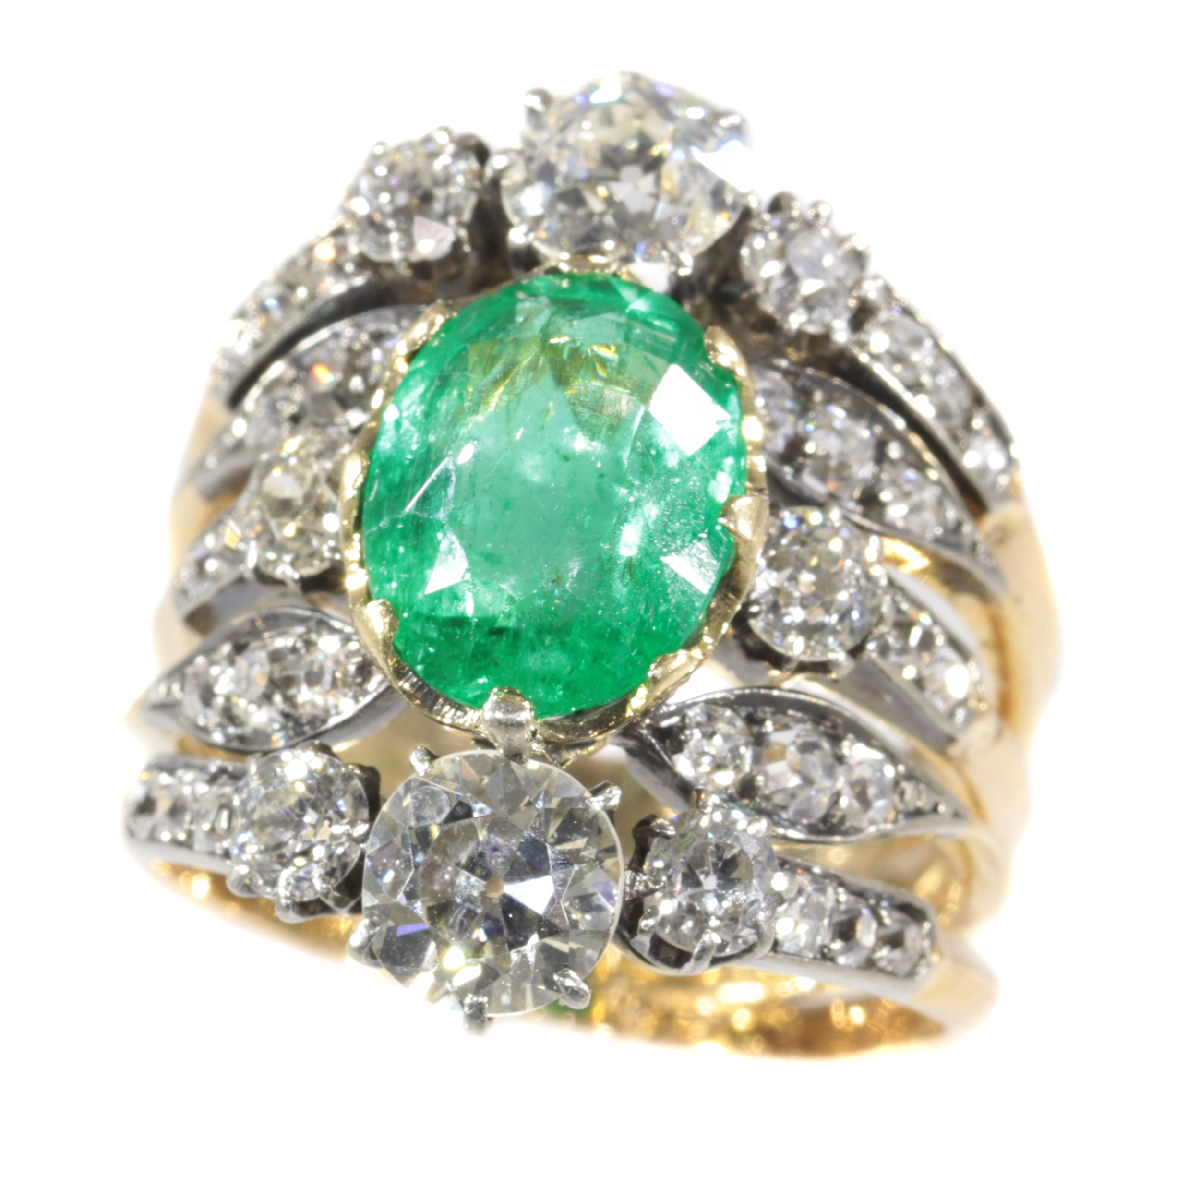 Victorian antique ring with diamonds and emerald